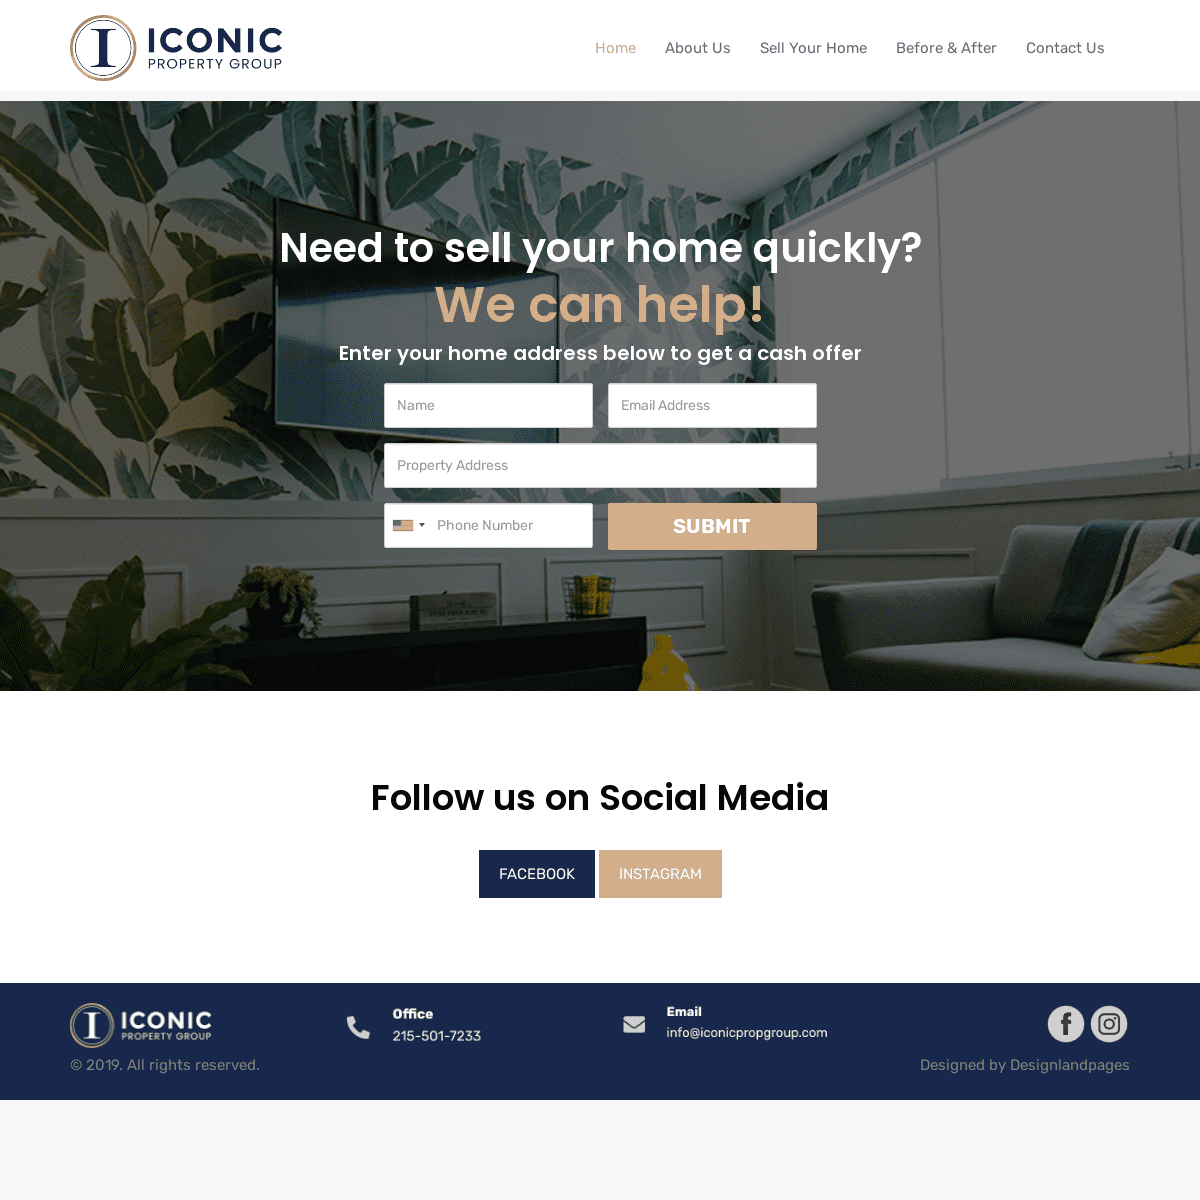 A complete backup of https://iconicpropgroup.com